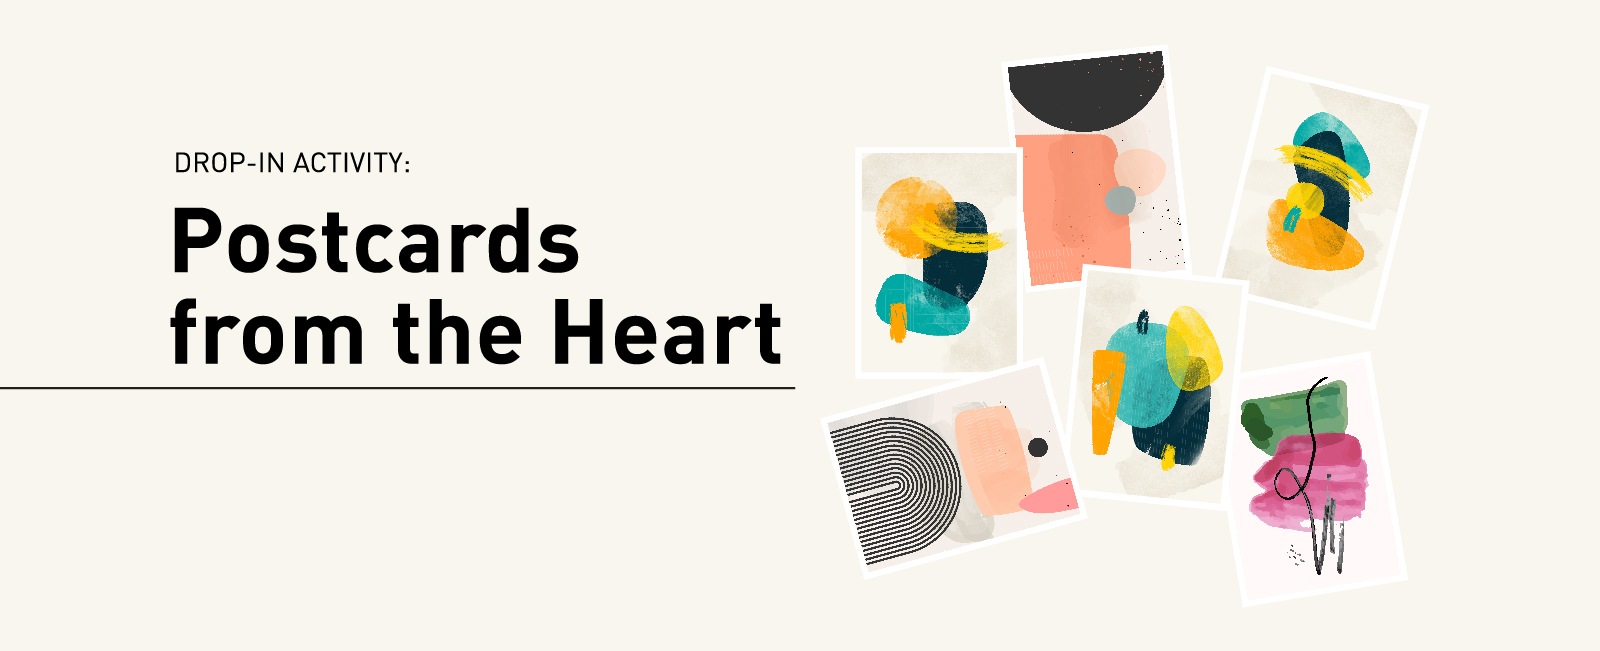 Drop-in activity: Postcards from the Heart